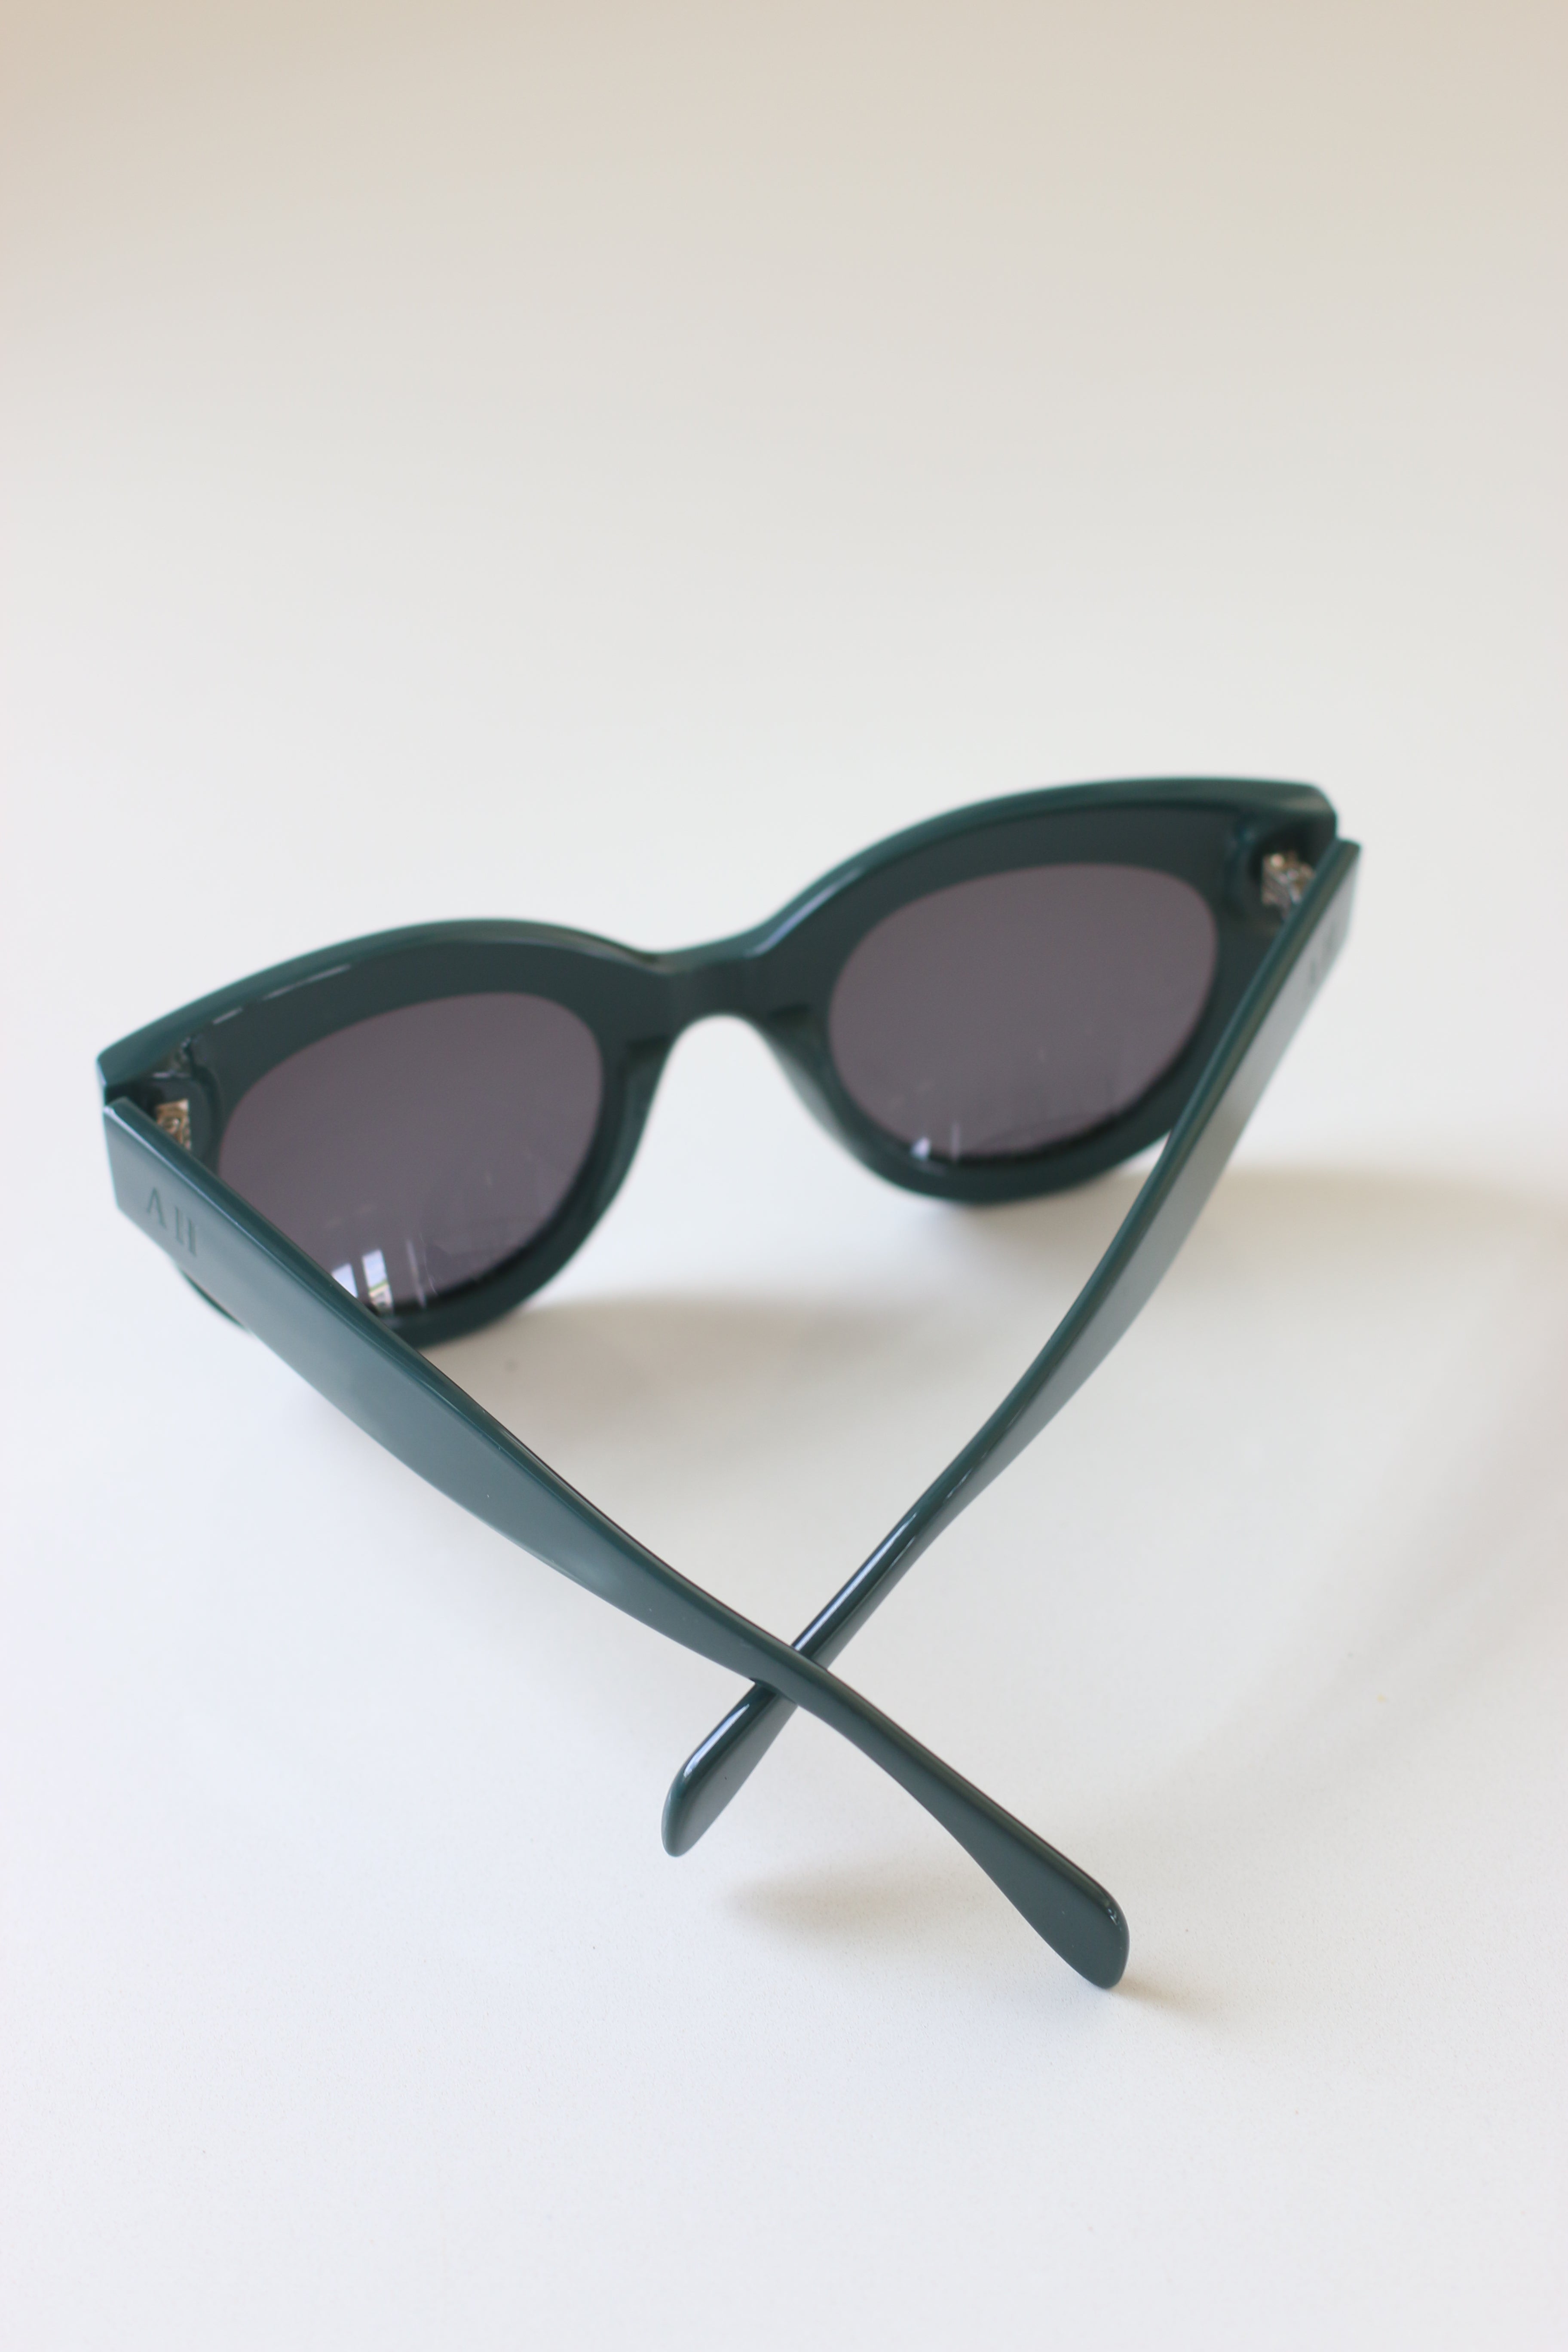  ANEA HILL The Wind luxury sunglasses boast a classic green frame, silver-tone hinges, and polarized lenses for superior protection.